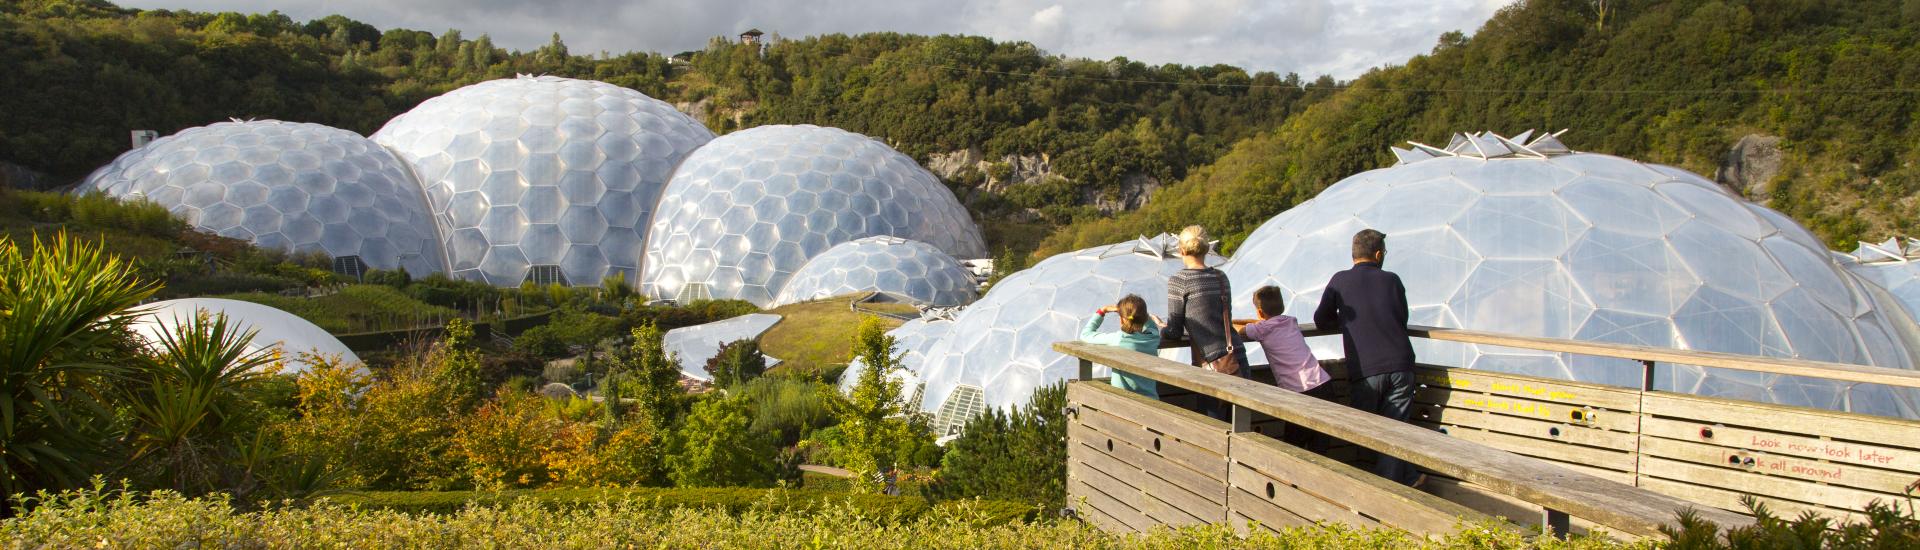 A young family looking out over the Eden biomes and gardens